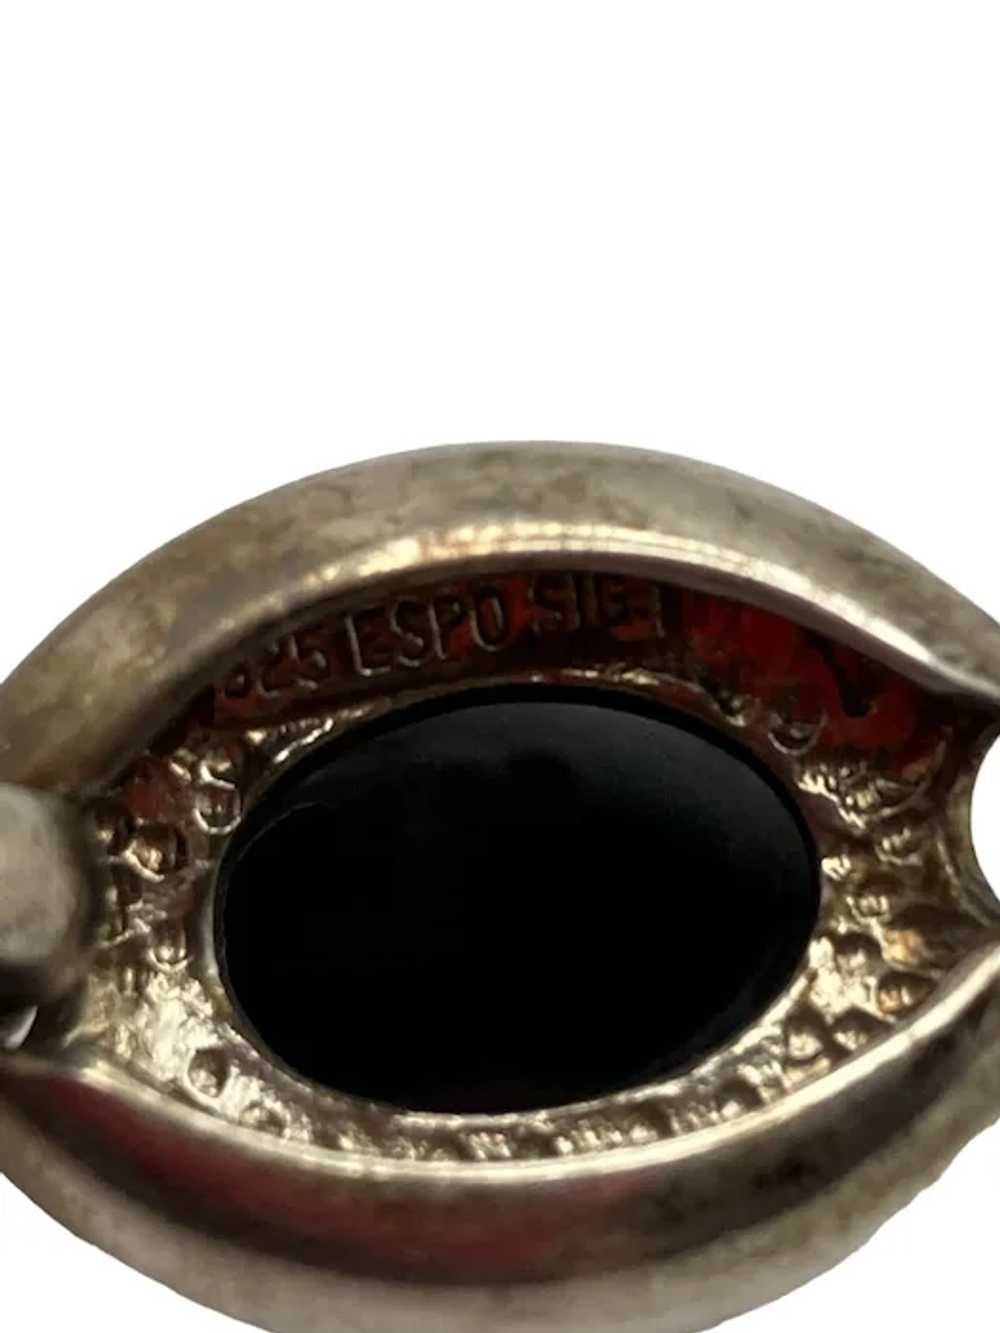 Joseph Esposito Sterling Silver and Onyx Bracelet - image 8